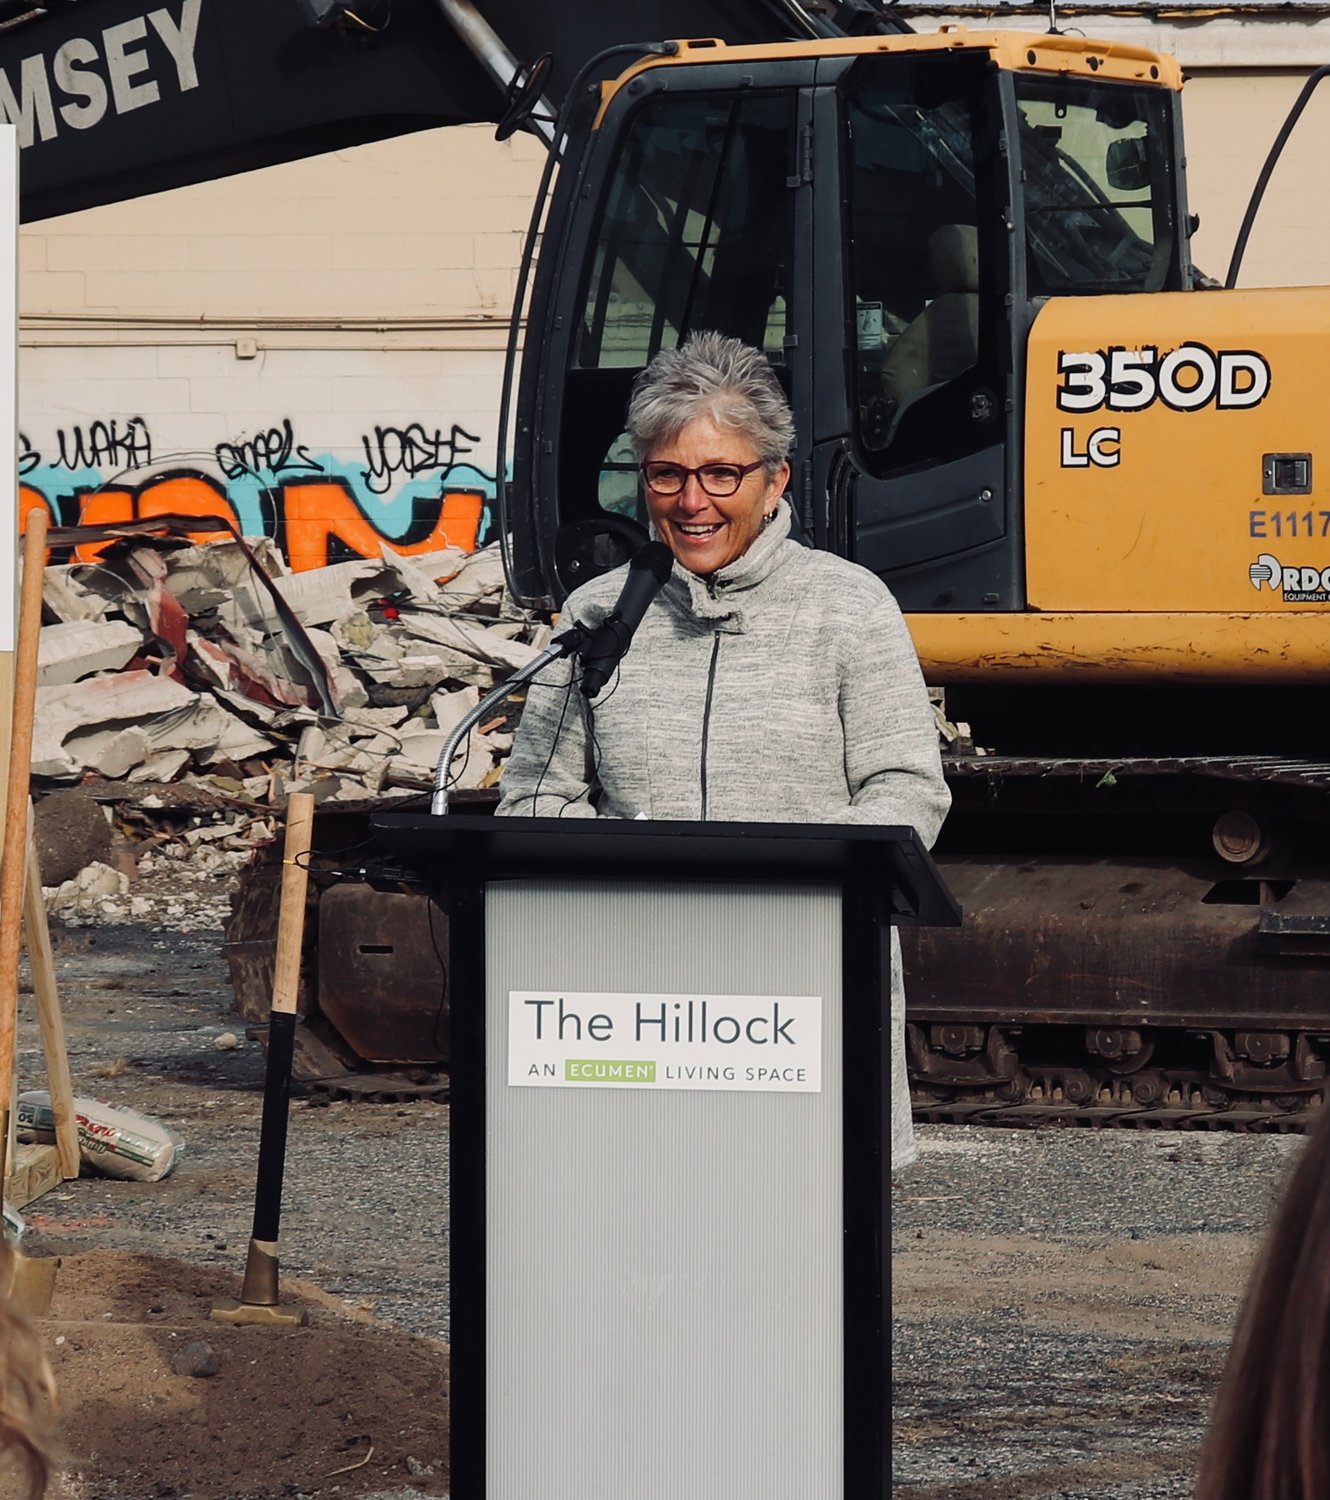 “This is an exciting day for us because this type of project is so central to our mission and vision that every older adult has a home with innovative services to live the life they choose,” said Ecumen president and CEO Shelley Kendrick during the groundbreaking on Oct. 26, 2021.